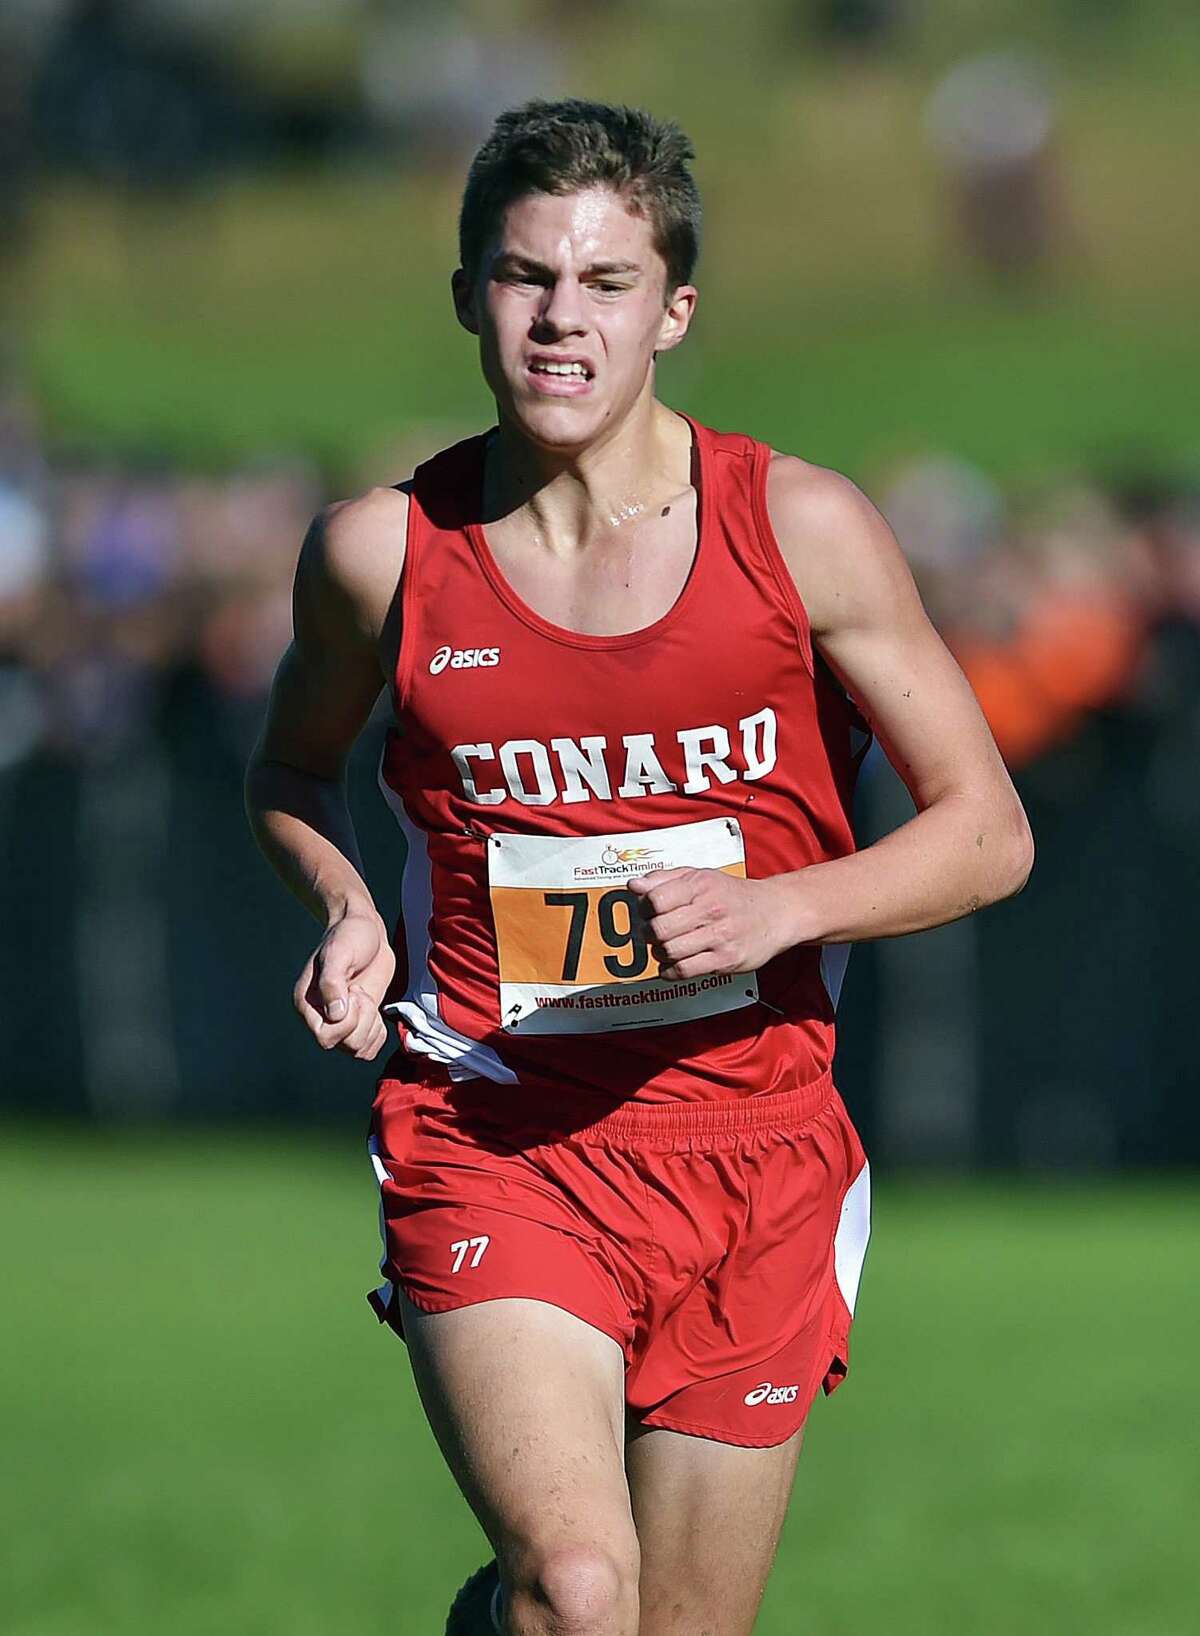 Conard freshman Gavin Sherry, the first place finisher won the CCC cross country championships in 16:16.0 Tuesday, October 16, 2018, at Wickham Park in Manchester.